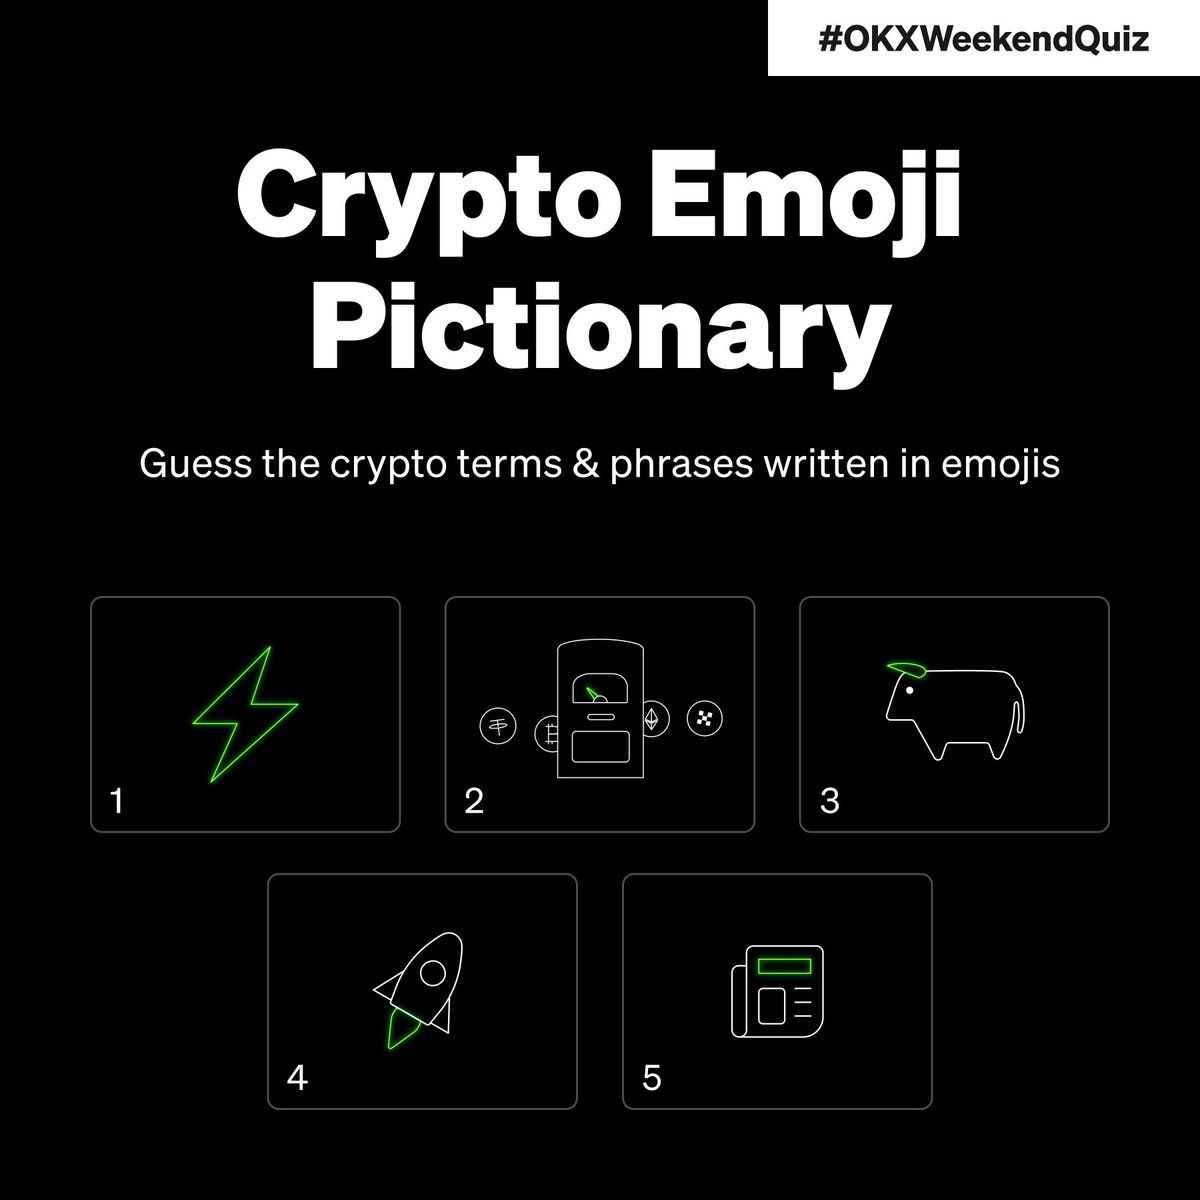 👋 Win 5️⃣0️⃣0️⃣ USDT with the #OKXWeekendQuiz  🎉

Enter now:
⚫️ Follow @okx
⚫️ RT + comment your answer
⚫️ Fill: giv.gg/quiz142